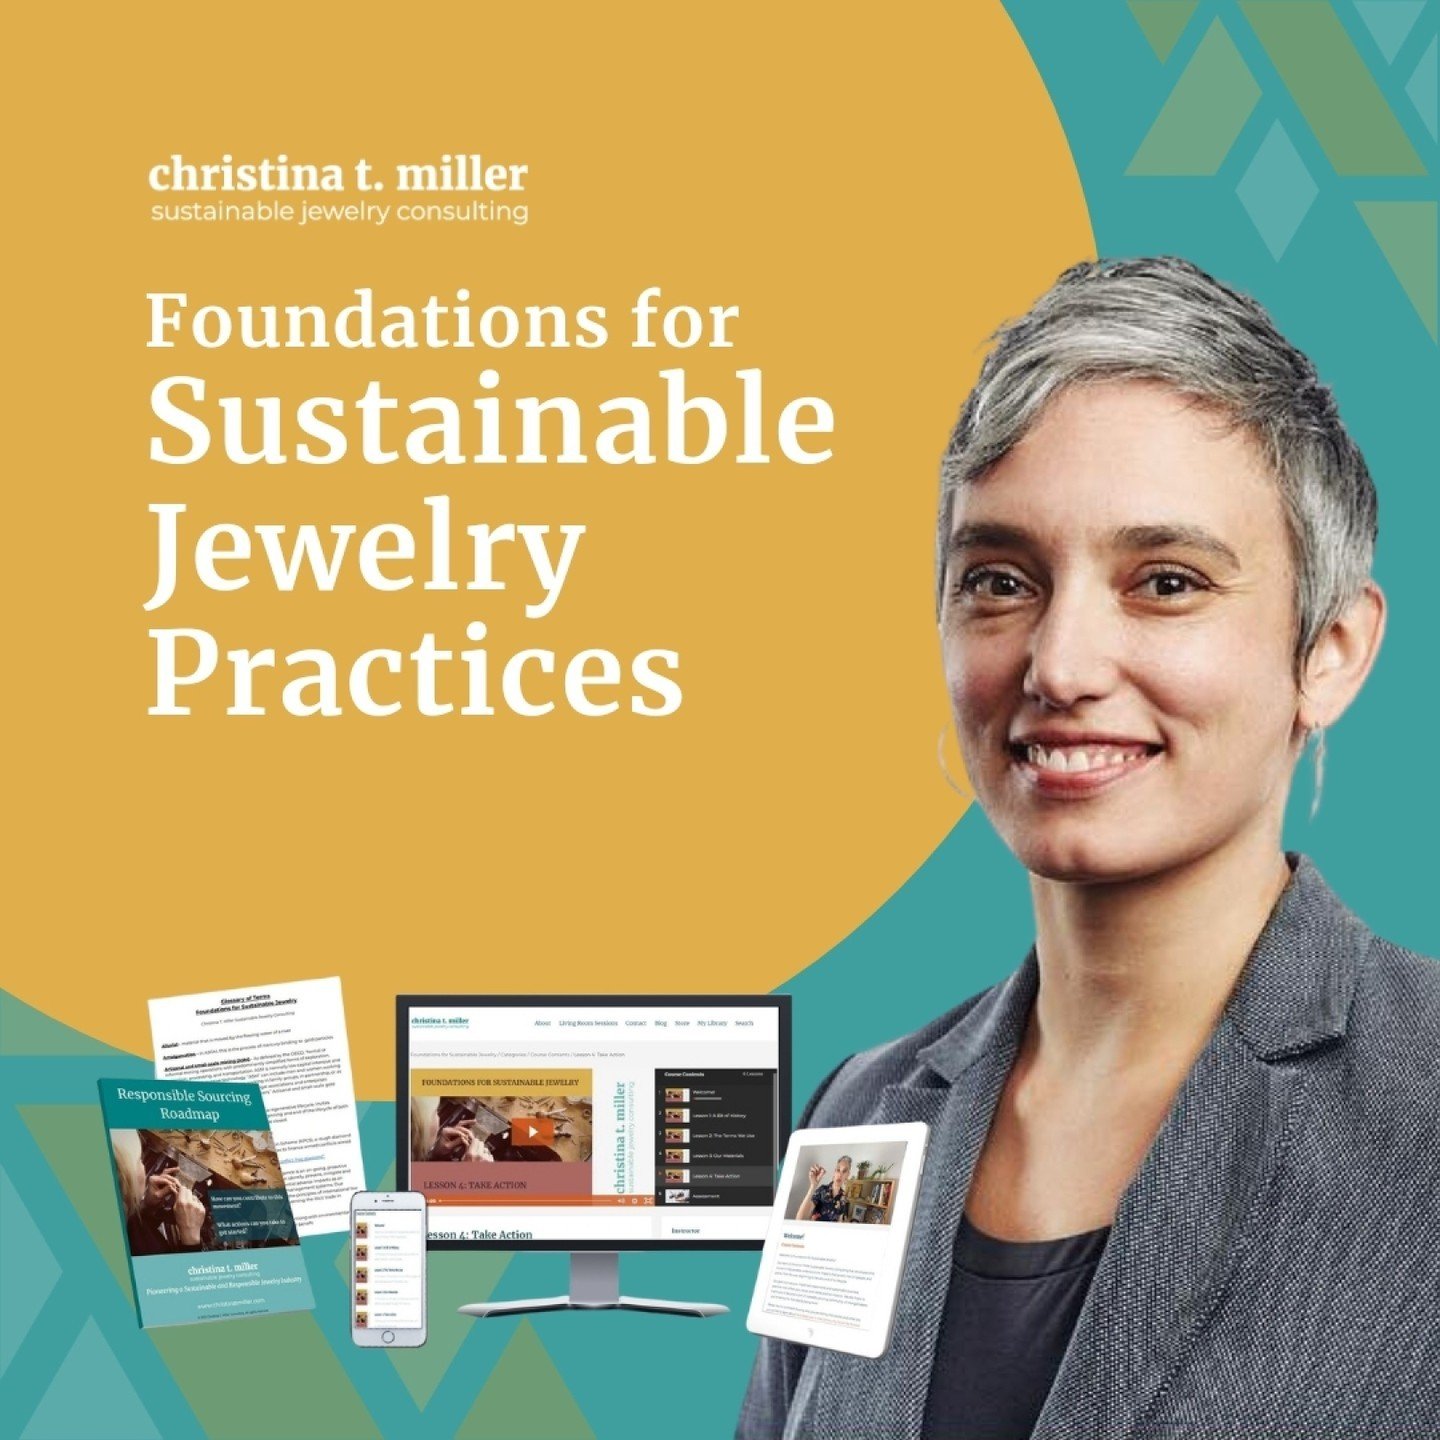 Today is the LAST DAY to enroll in the Foundations for Sustainable Jewelry Practices course from @christinatmiller! 🚨

This virtual course is designed for jewelry industry professionals, business owners and staff, students, artists, hobbyists - anyo